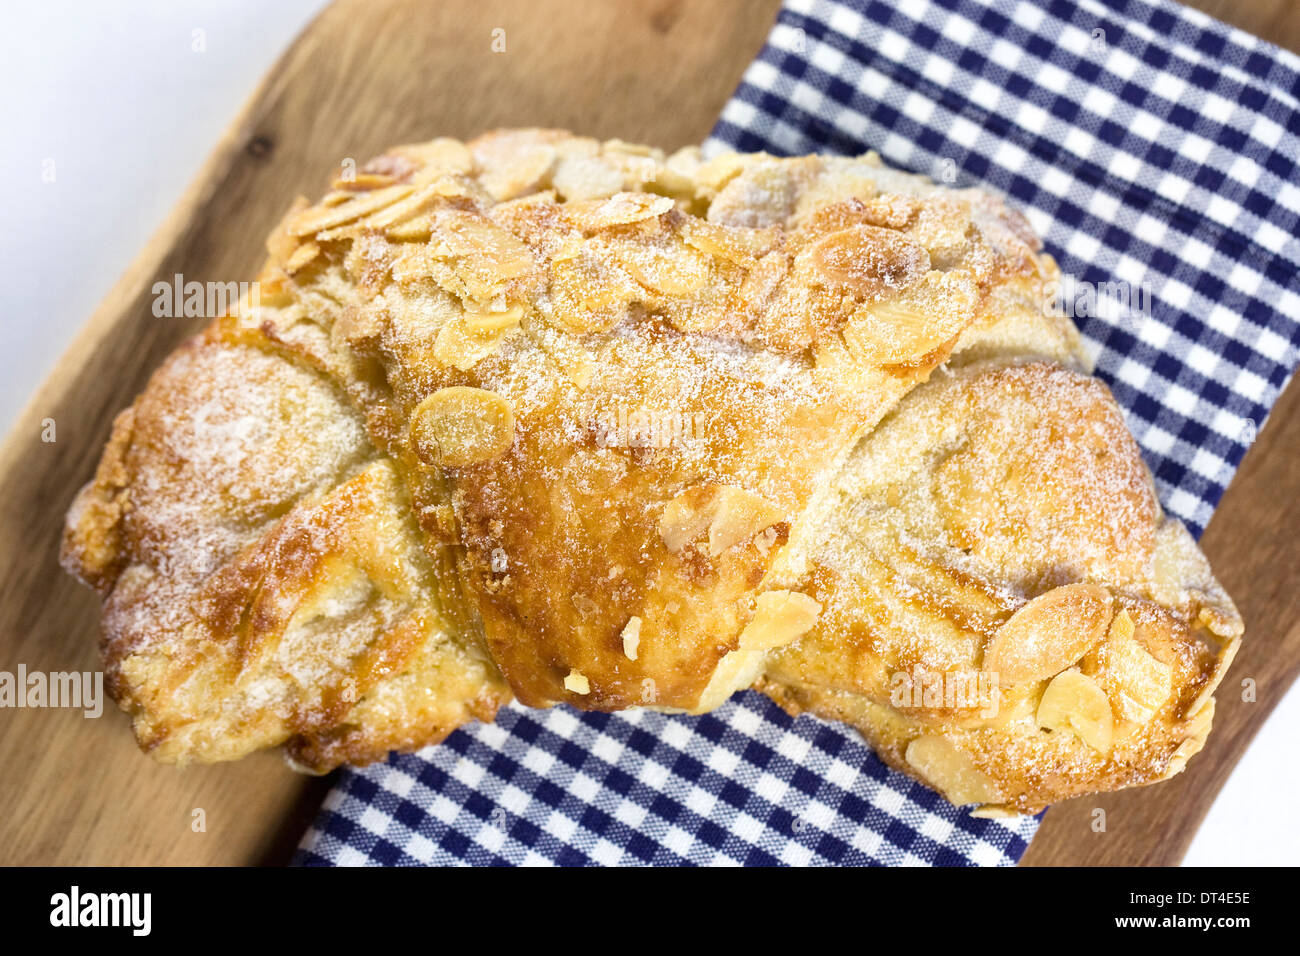 Almond croissant. Single crescent shaped french pastry on a wooden board. Stock Photo